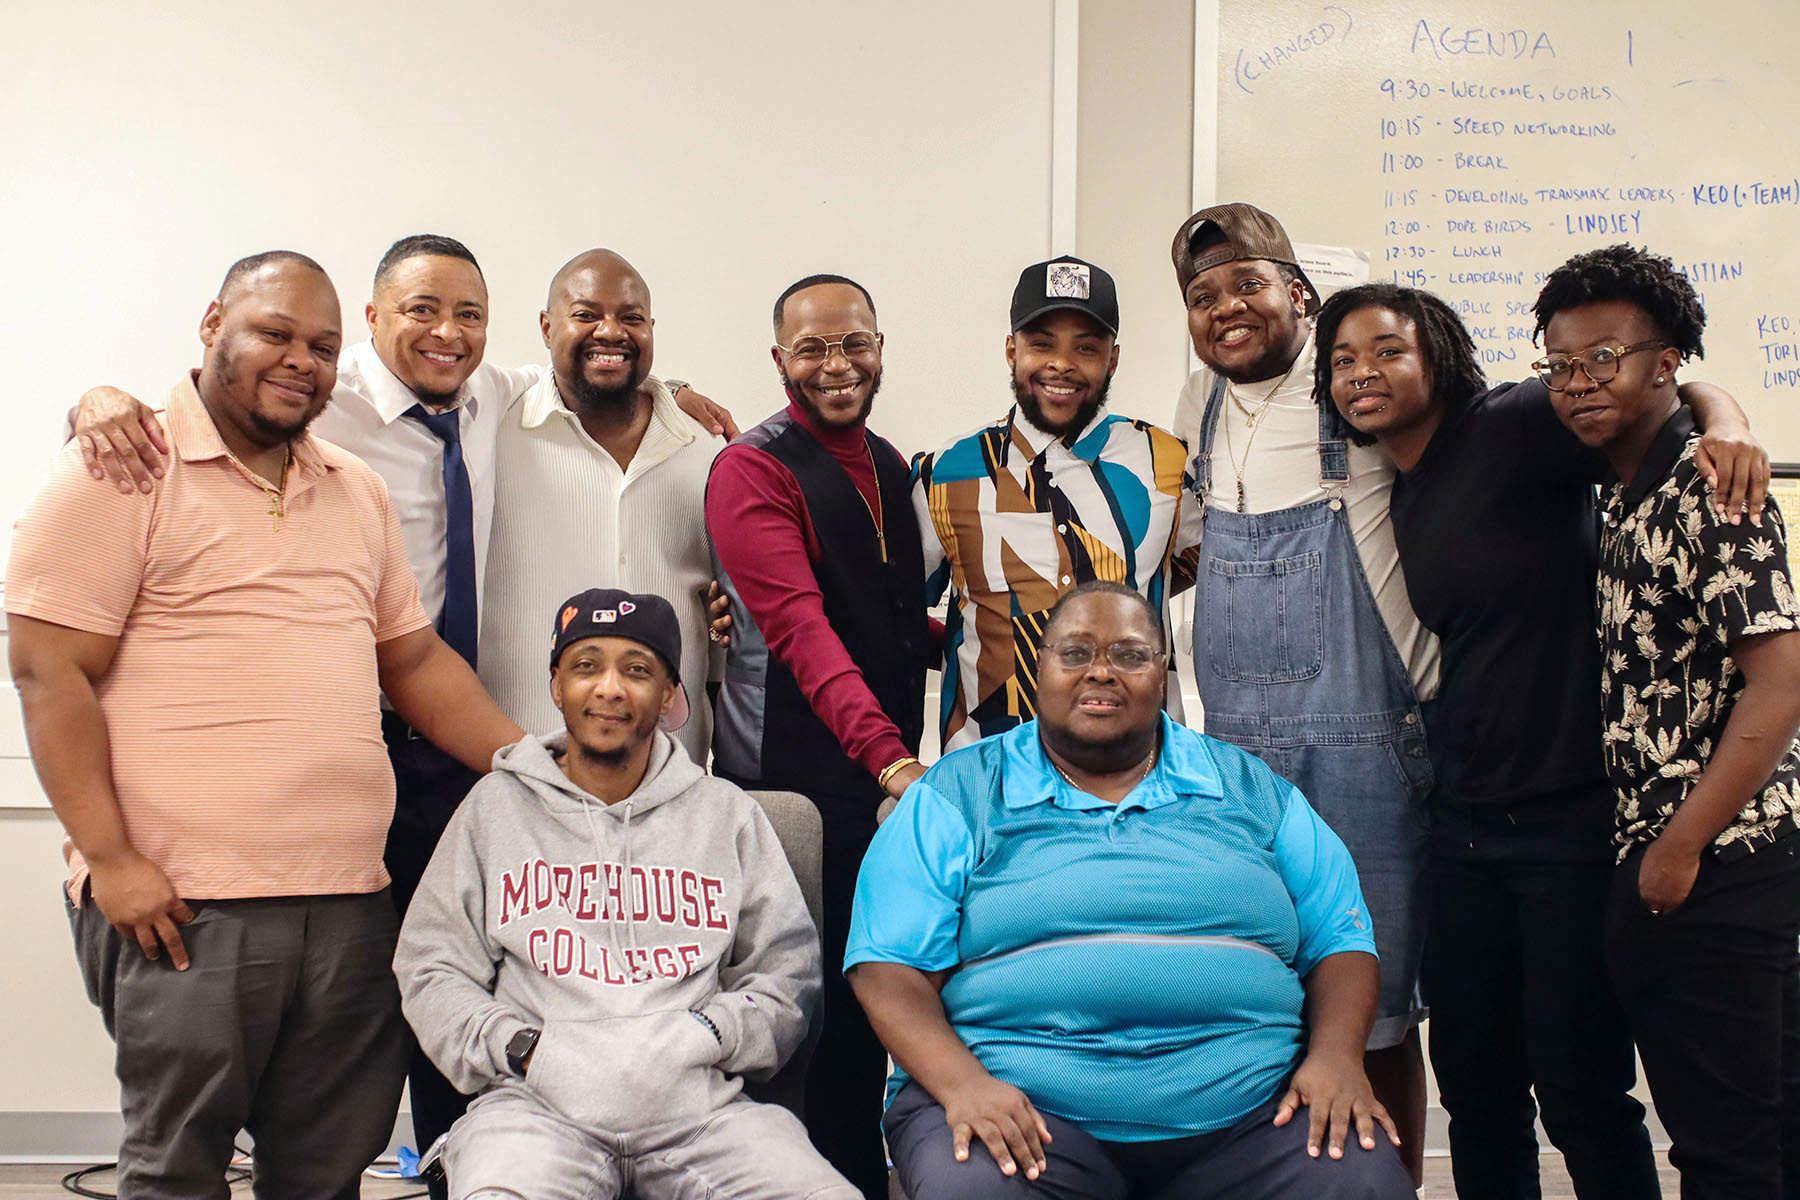 Group photo of Black trans men posing for a group photo after the Transgender Justice Initiative's workshop.